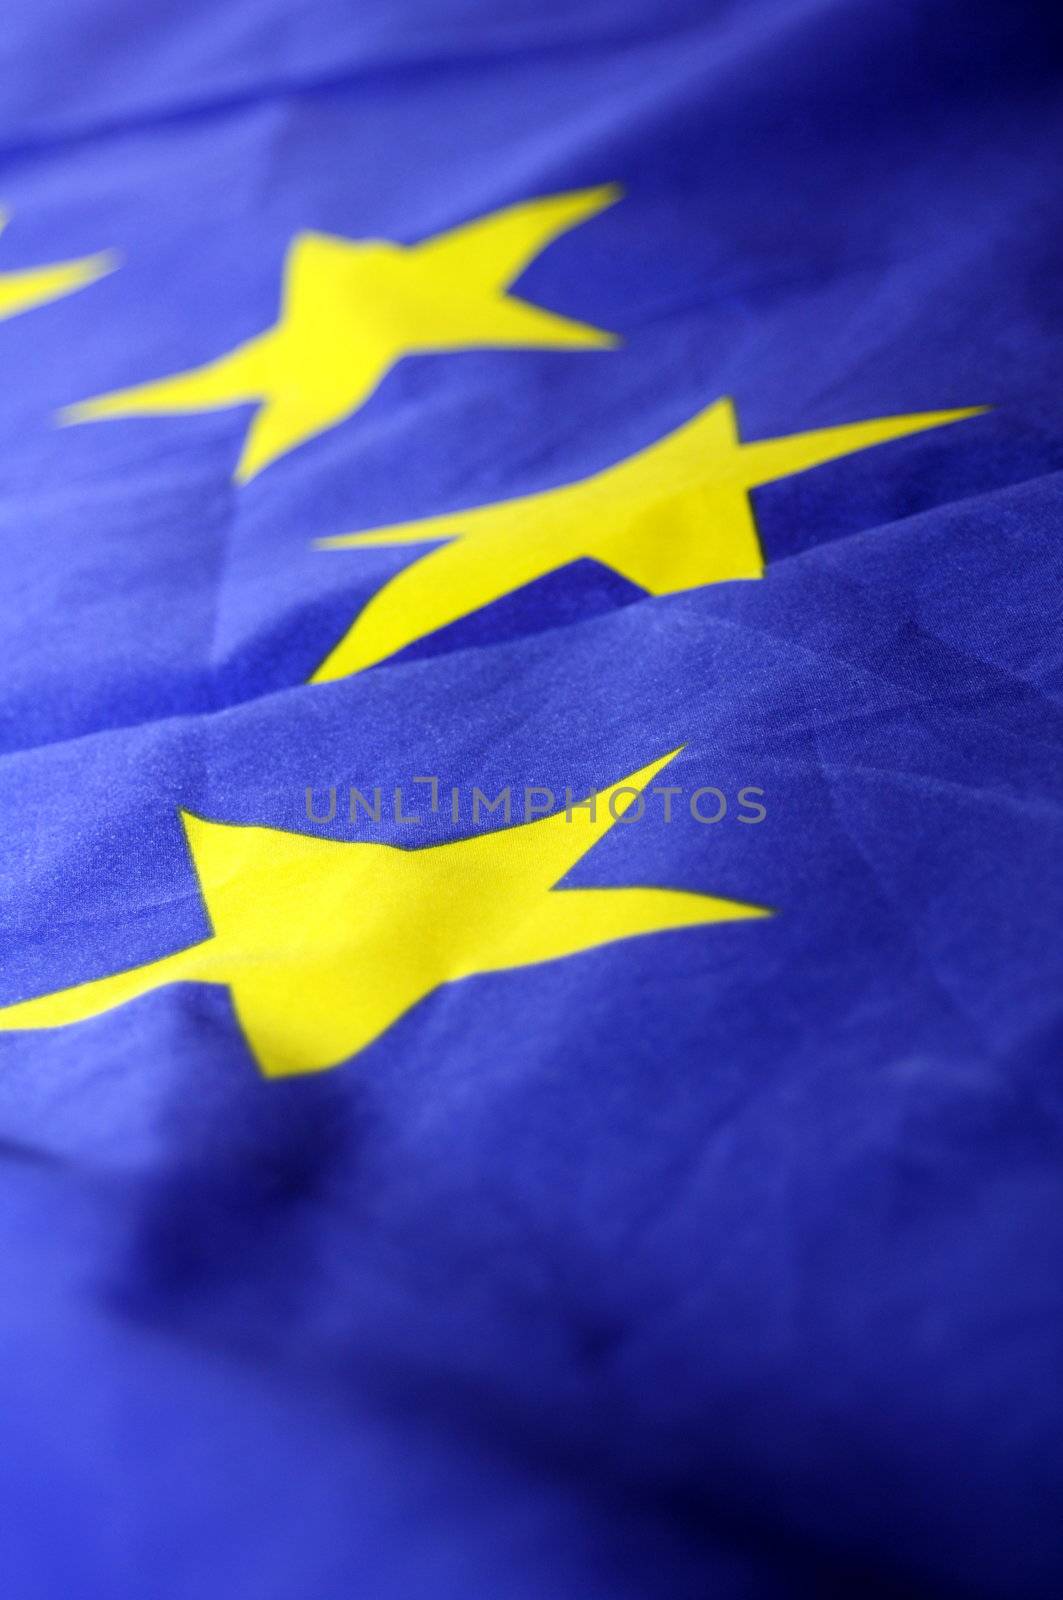 eu or european union flag in blue with yellow stars